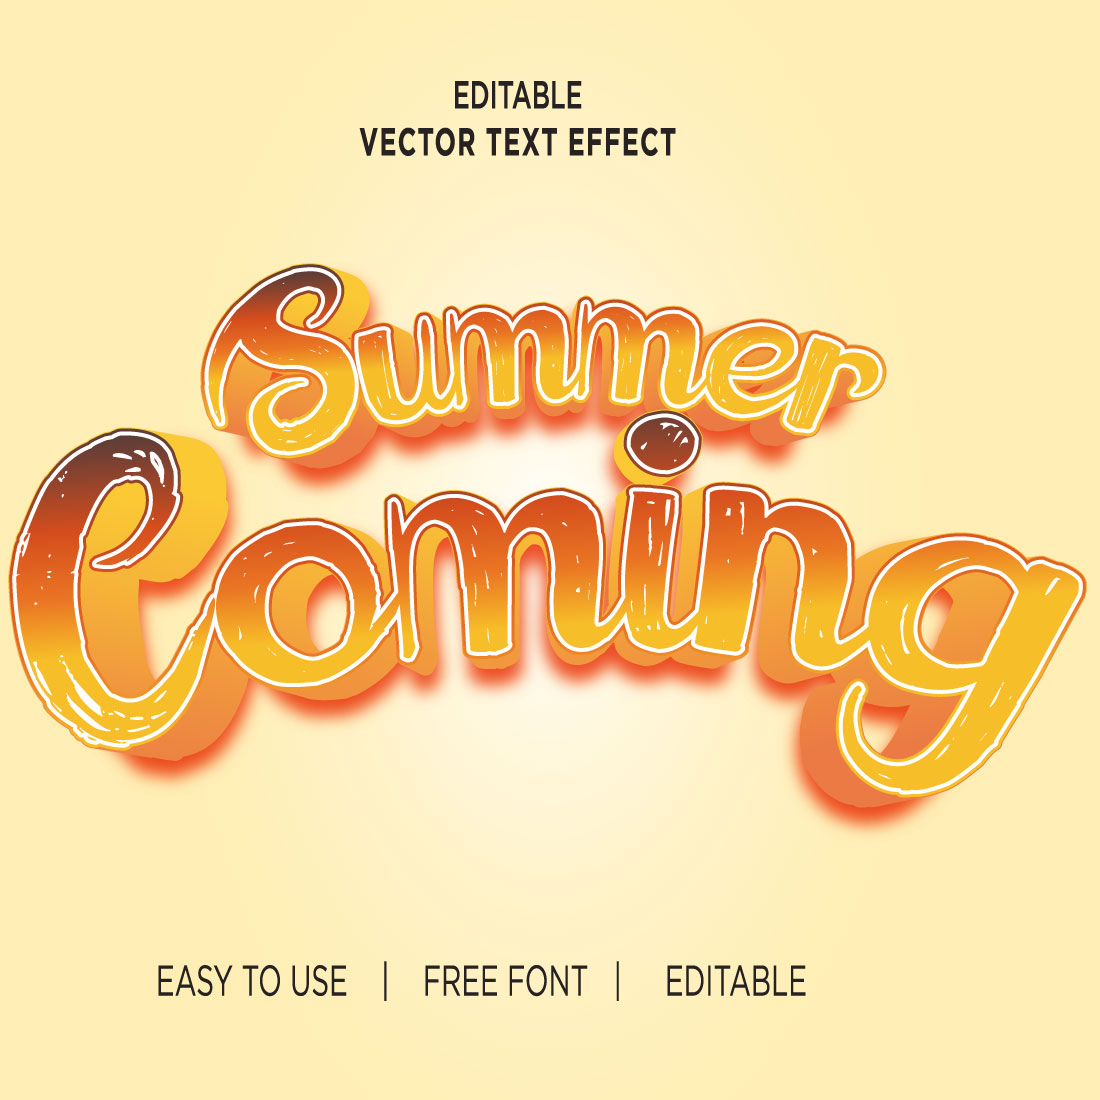 Summer 3d text effects vector illustrations New Text style eps files Editable text effect vector preview image.